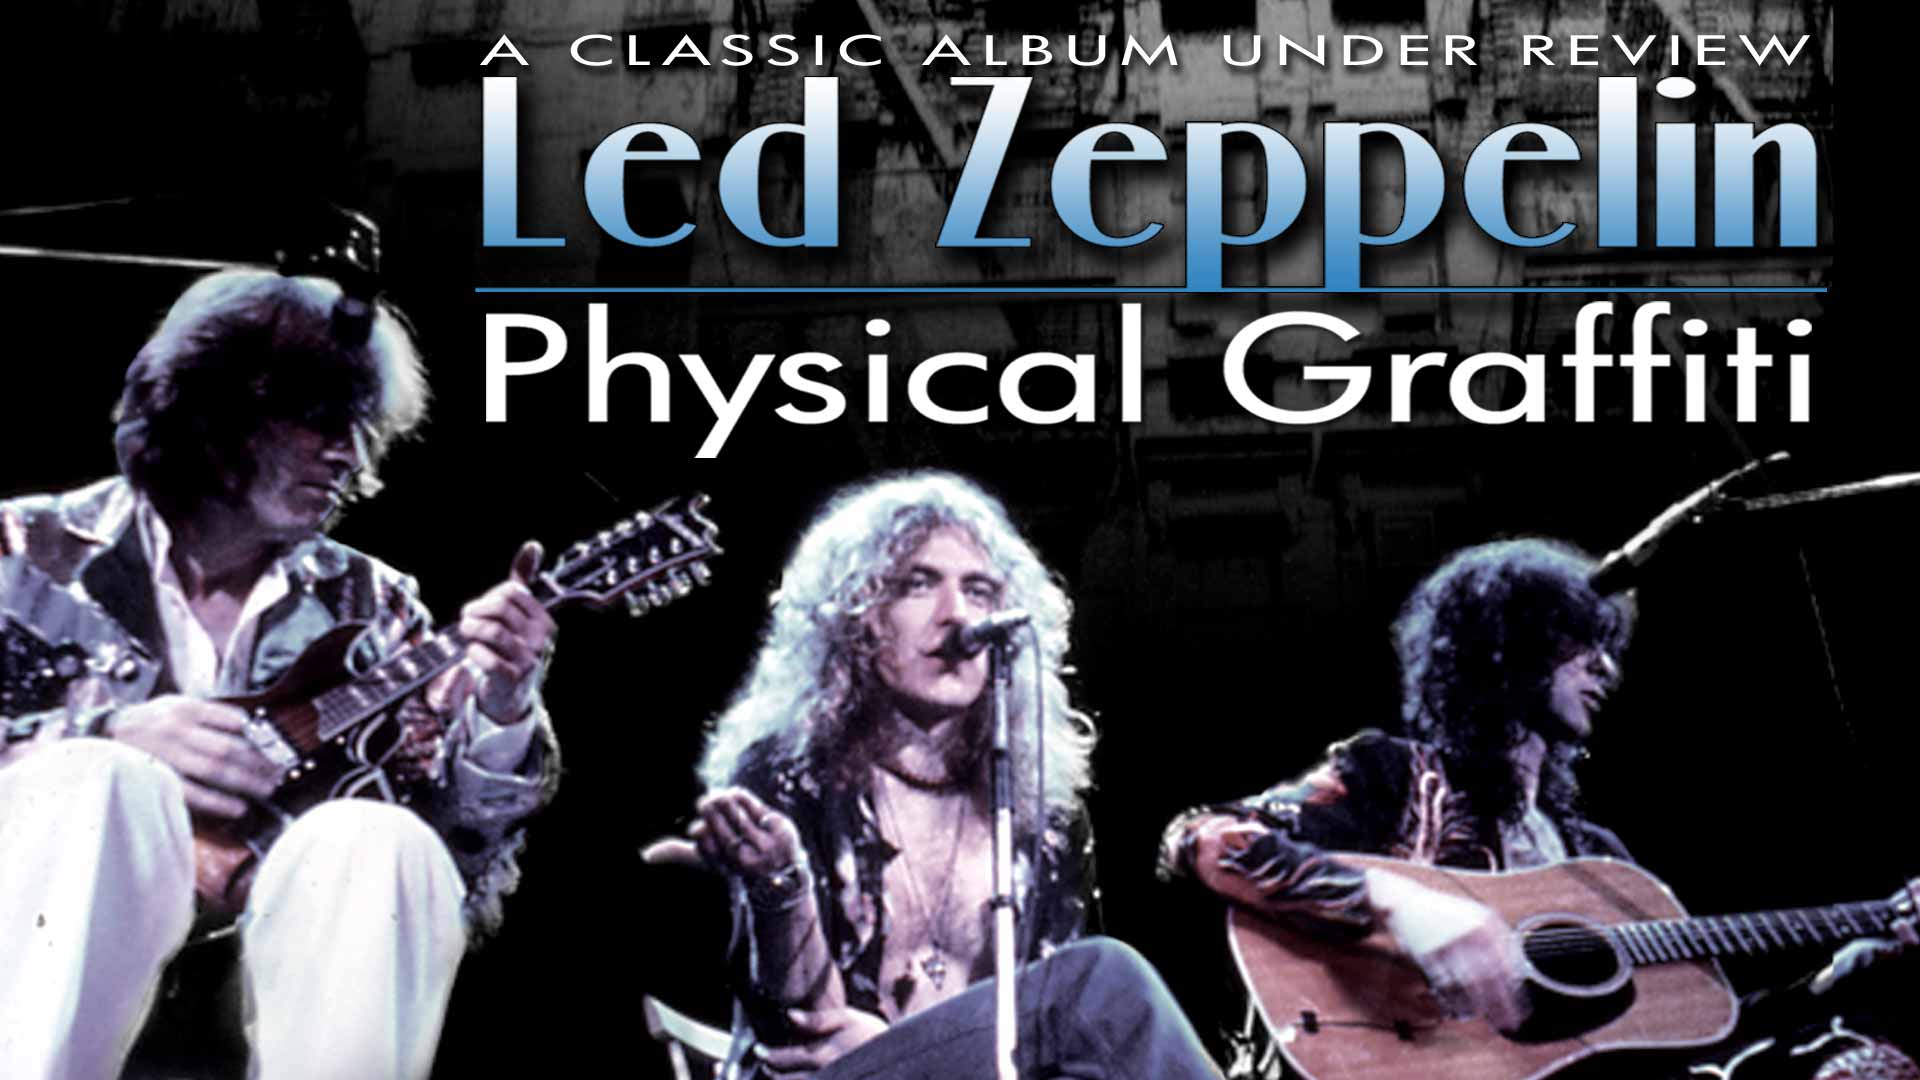 Led Zeppelin: Physical Graffiti - A Classic Album Under Review